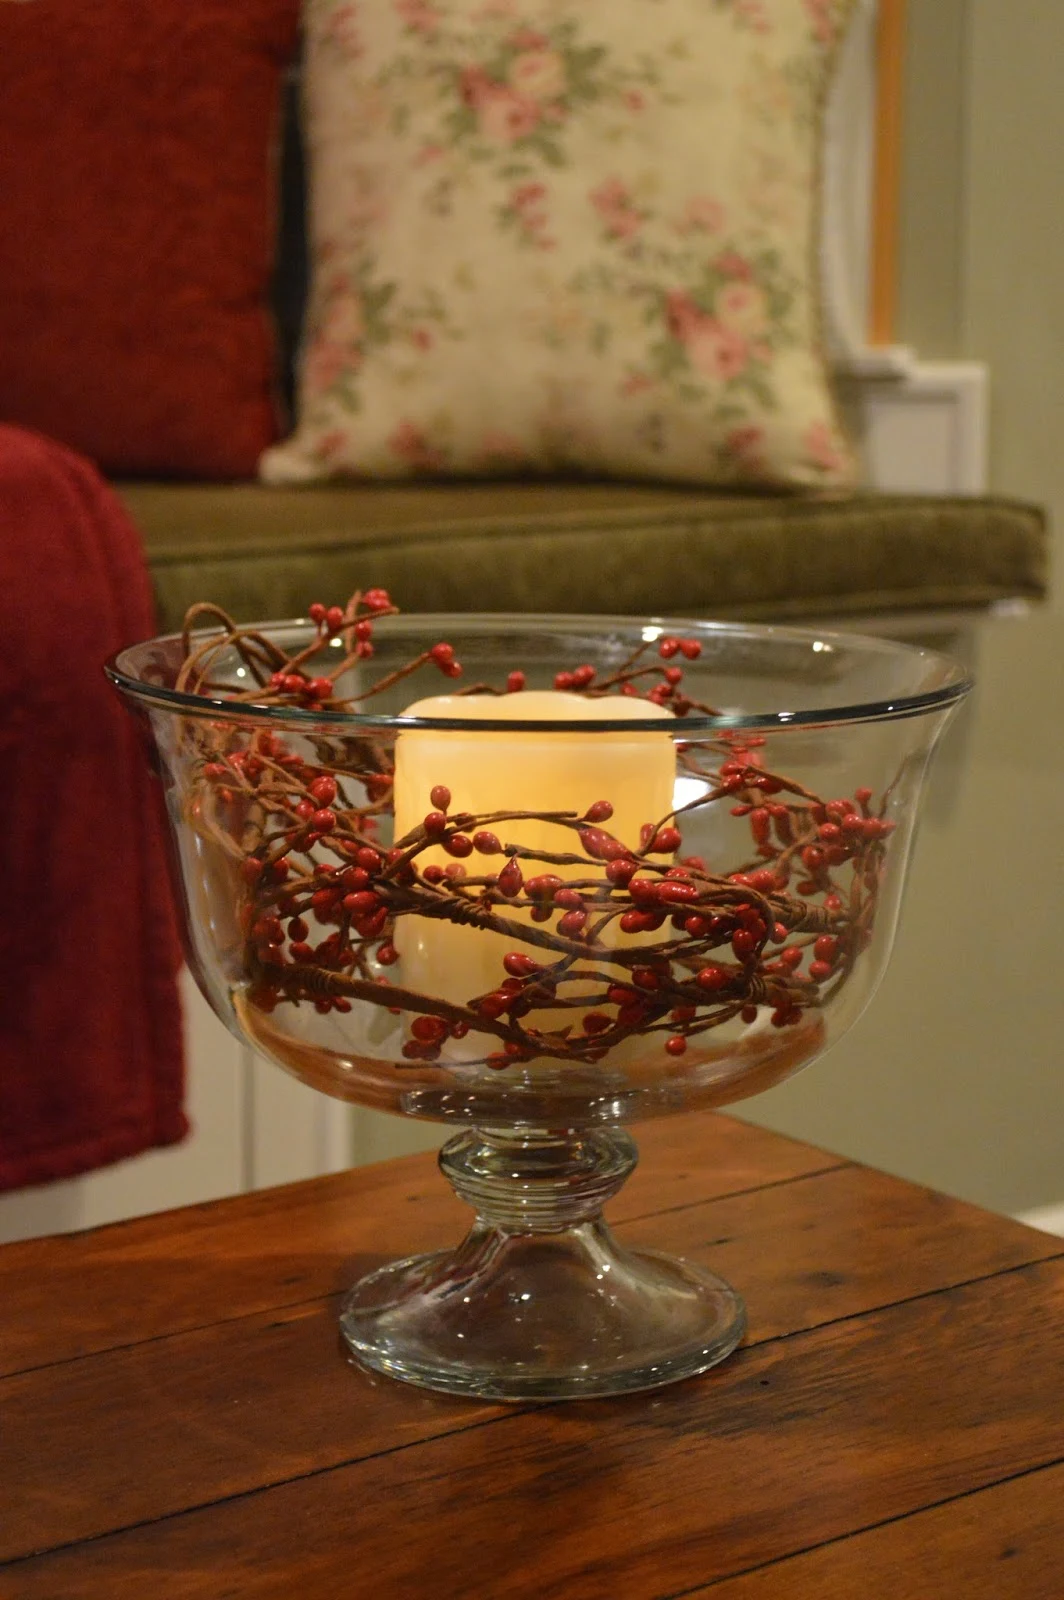 Glass bowl with candle and berries inside